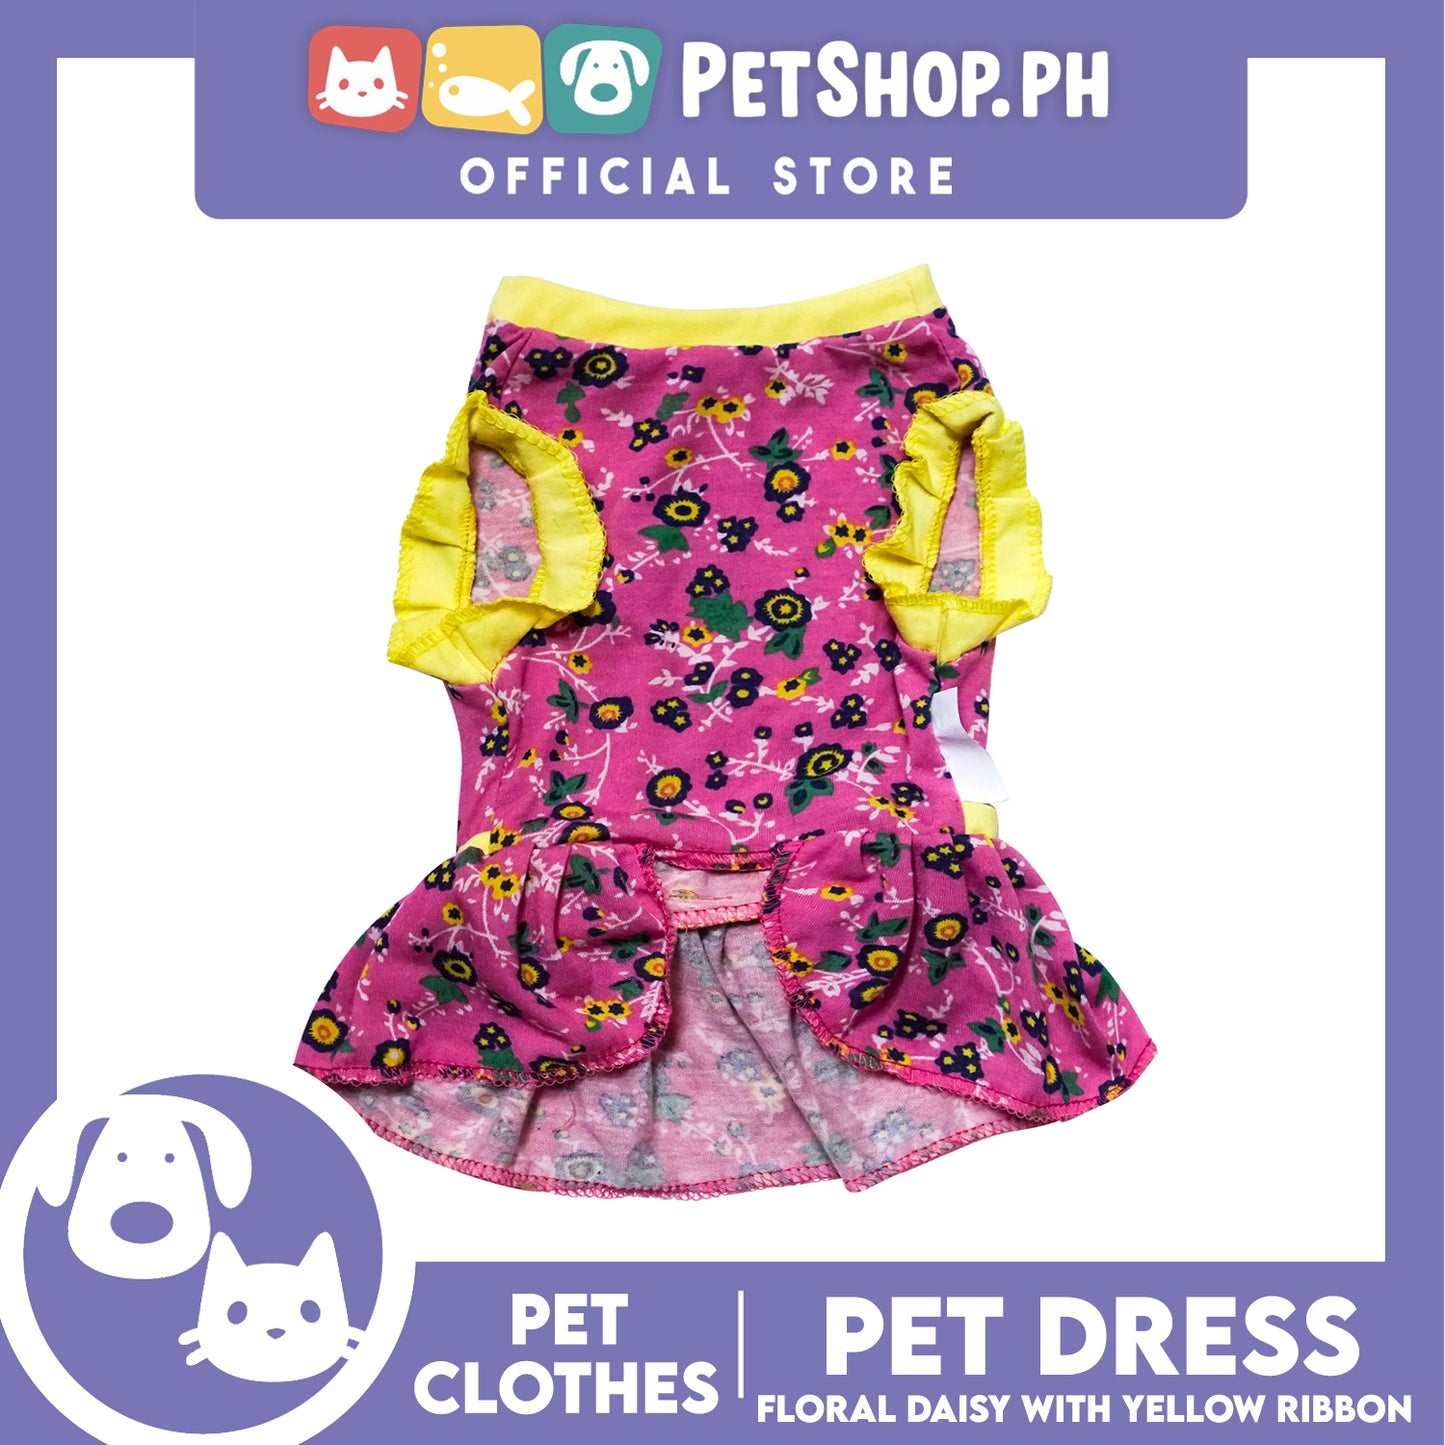 Pet Dress Floral Daisy with Yellow Ribbon (Large) Pet Dress Clothes Perfect for Dog